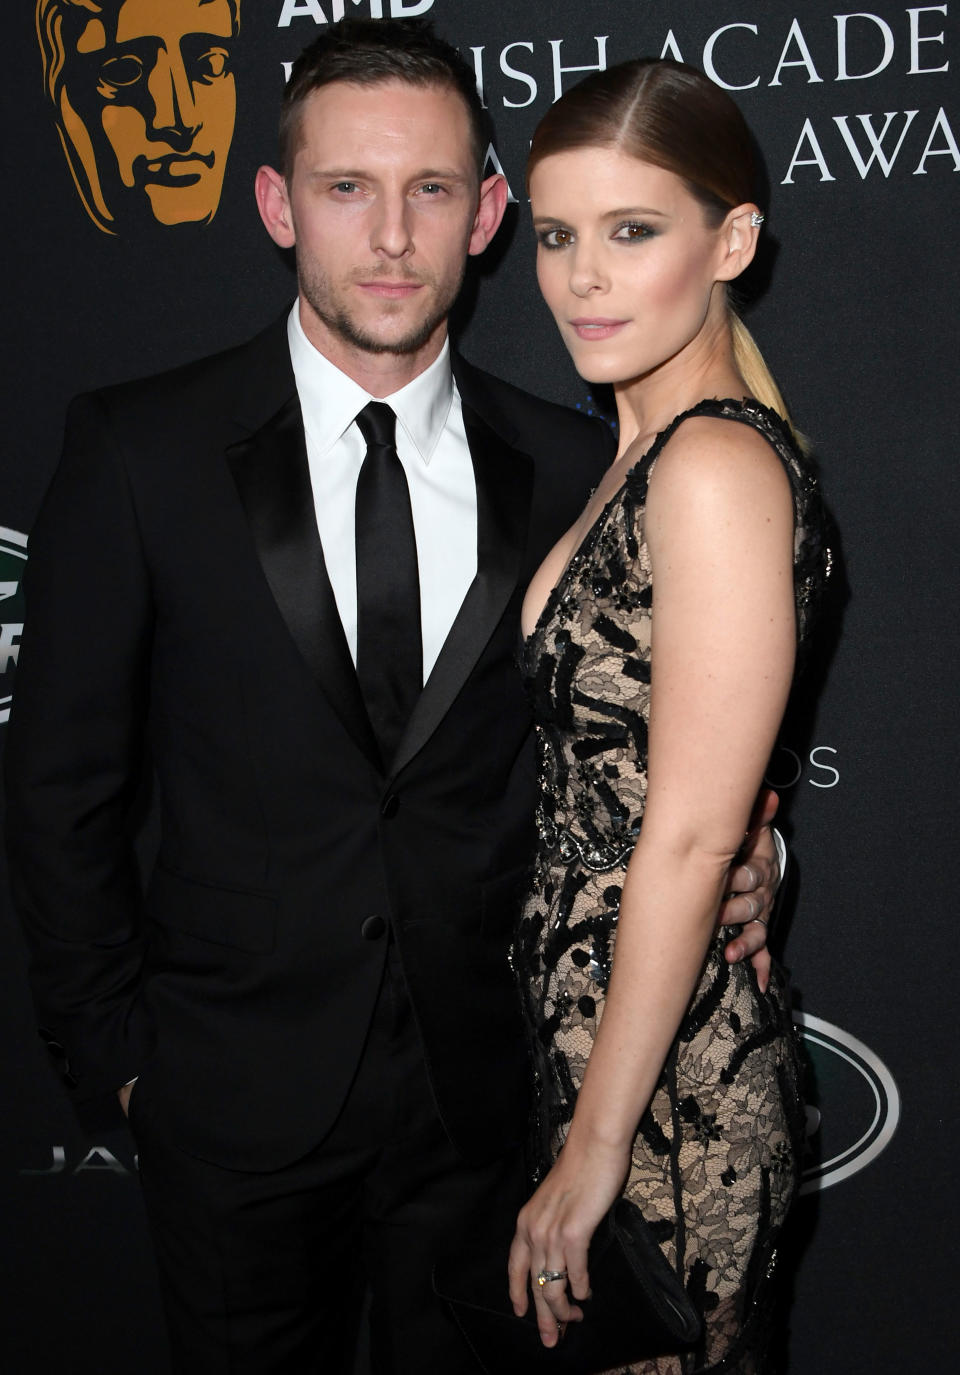 <p><b>"For me, nothing feels any different, and I think that's the way it should be. You make a dedication to each other, and that's it."</b> — Jamie Bell, on <span>married life with wife Kate Mara</span>, to <i>Entertainment Tonight</i></p>